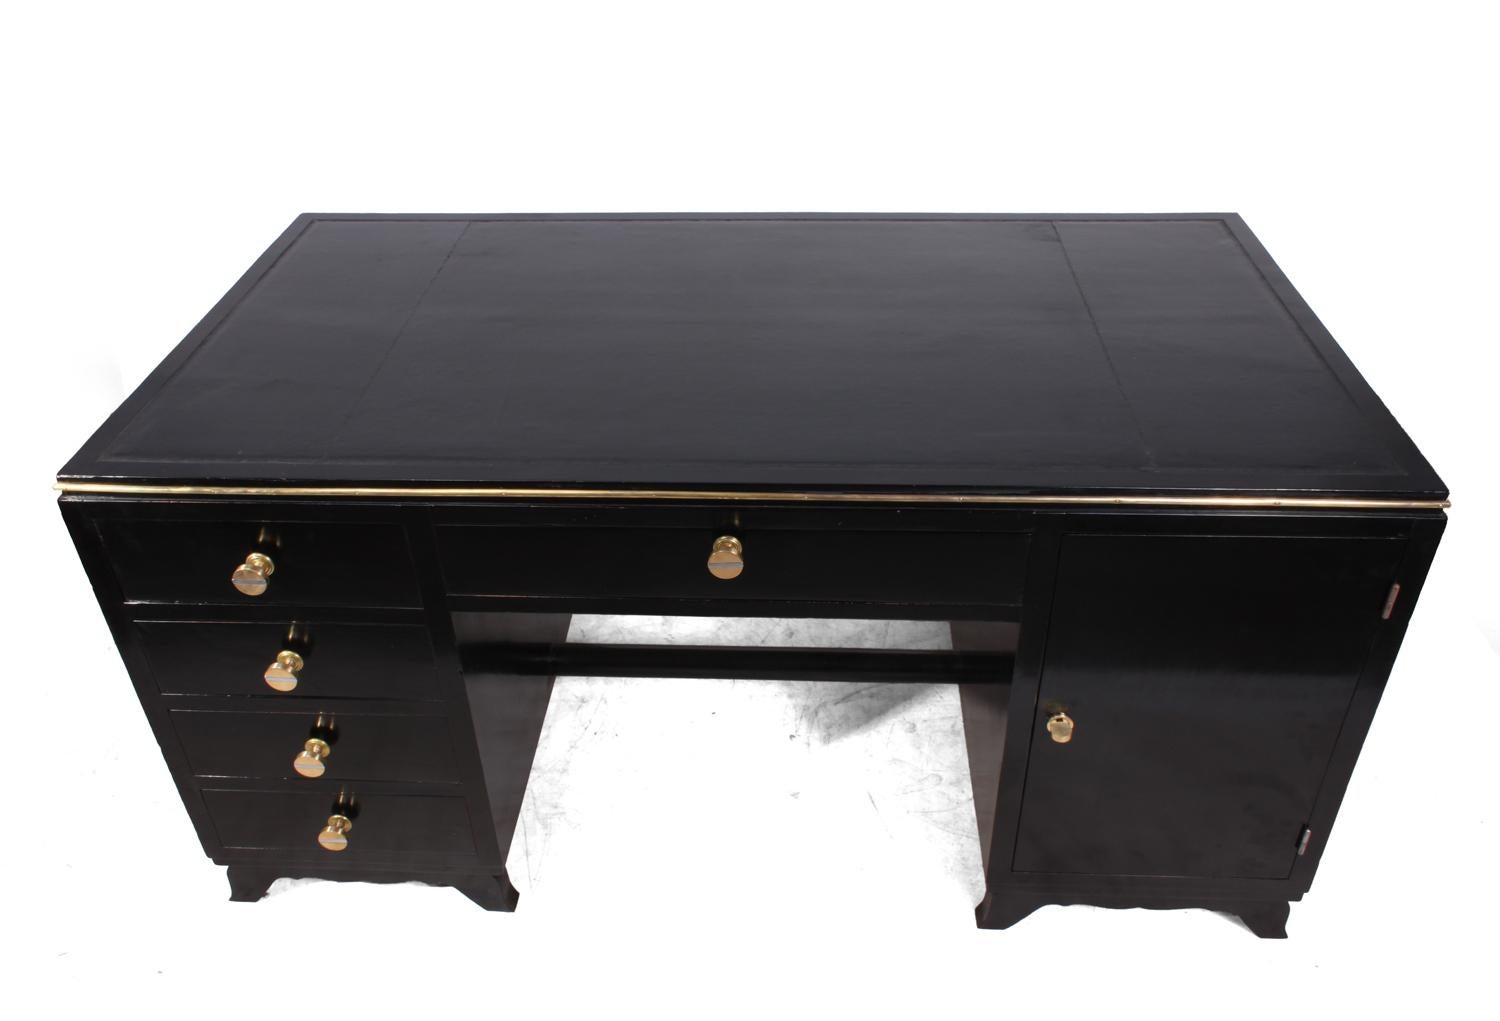 Art Deco desk in black piano lacquer
A twin pedestal Art Deco desk from France circa 1925 having four drawers on the left and cupboard on the right with shelf behind this is lockable and has working key. The Desk has brass handles with inset chrome